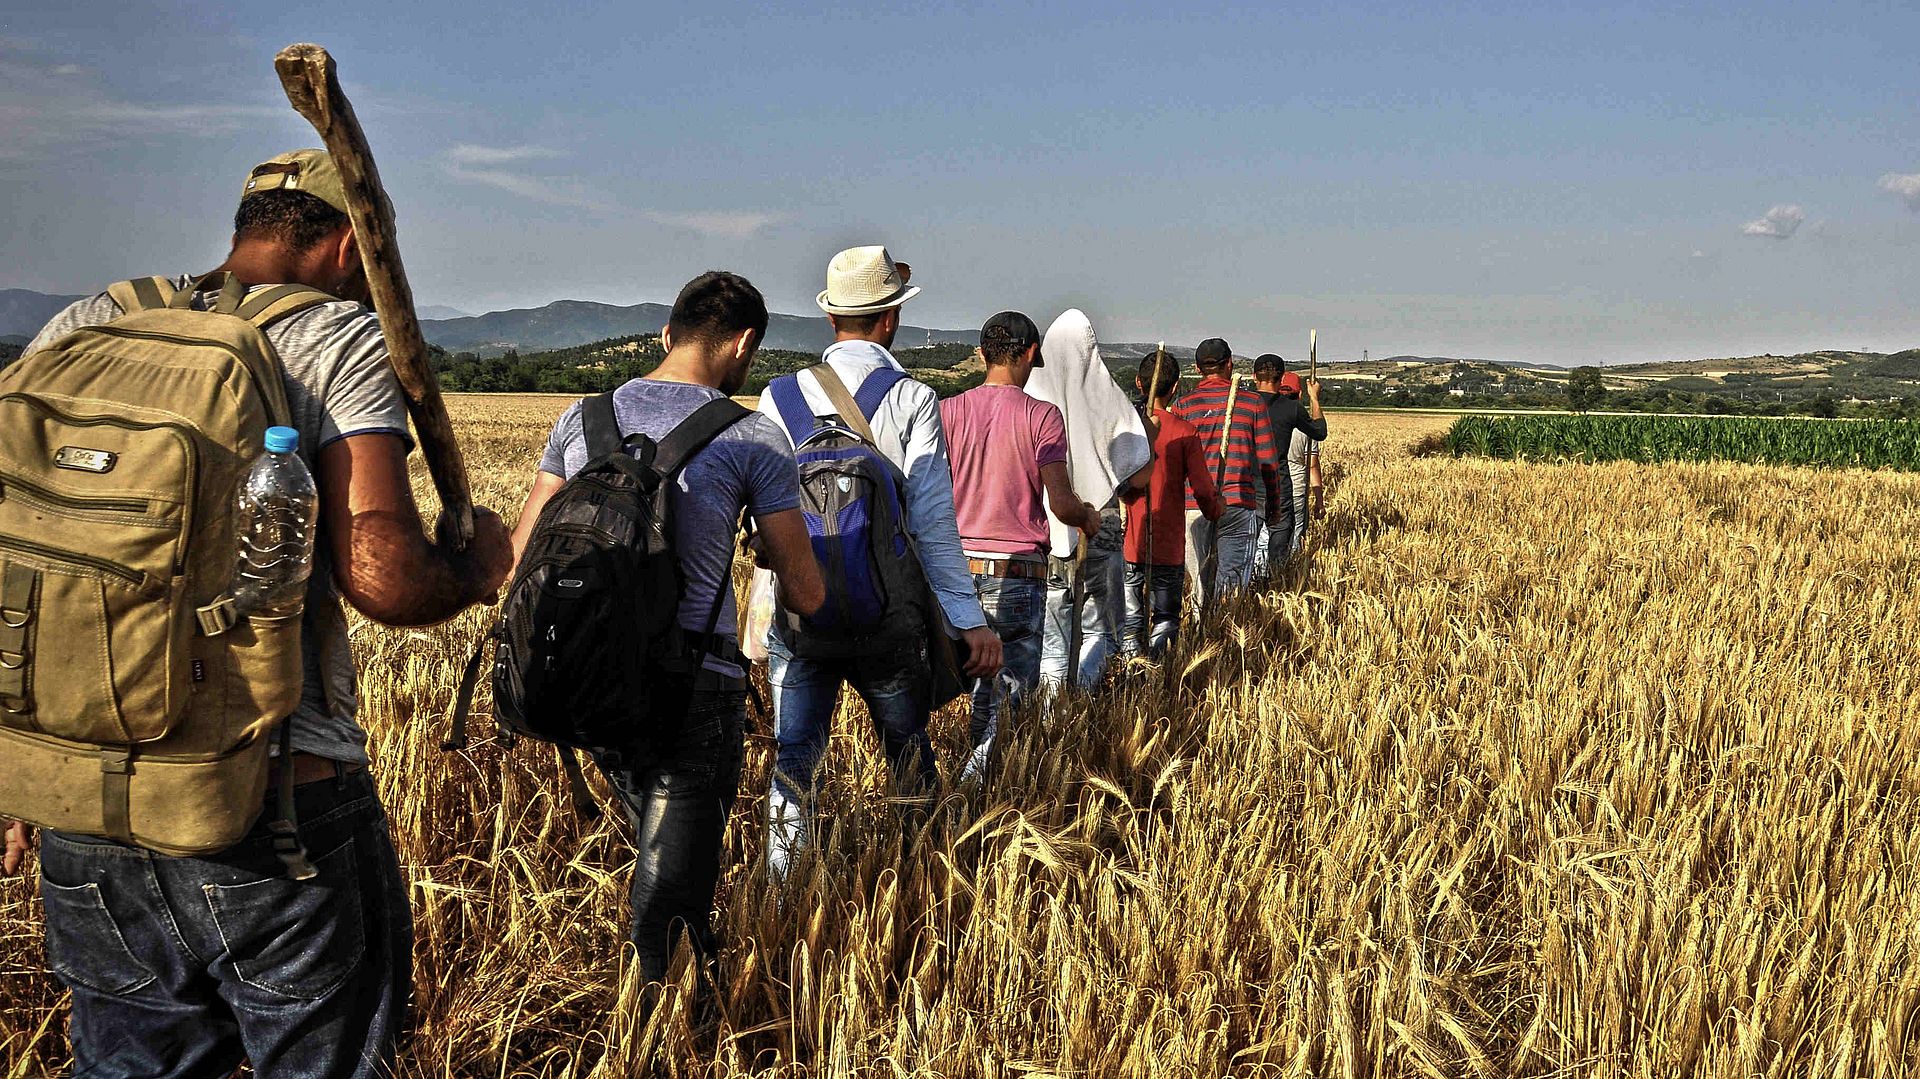 The pictore shows Syrian refugees on the Balkan route.